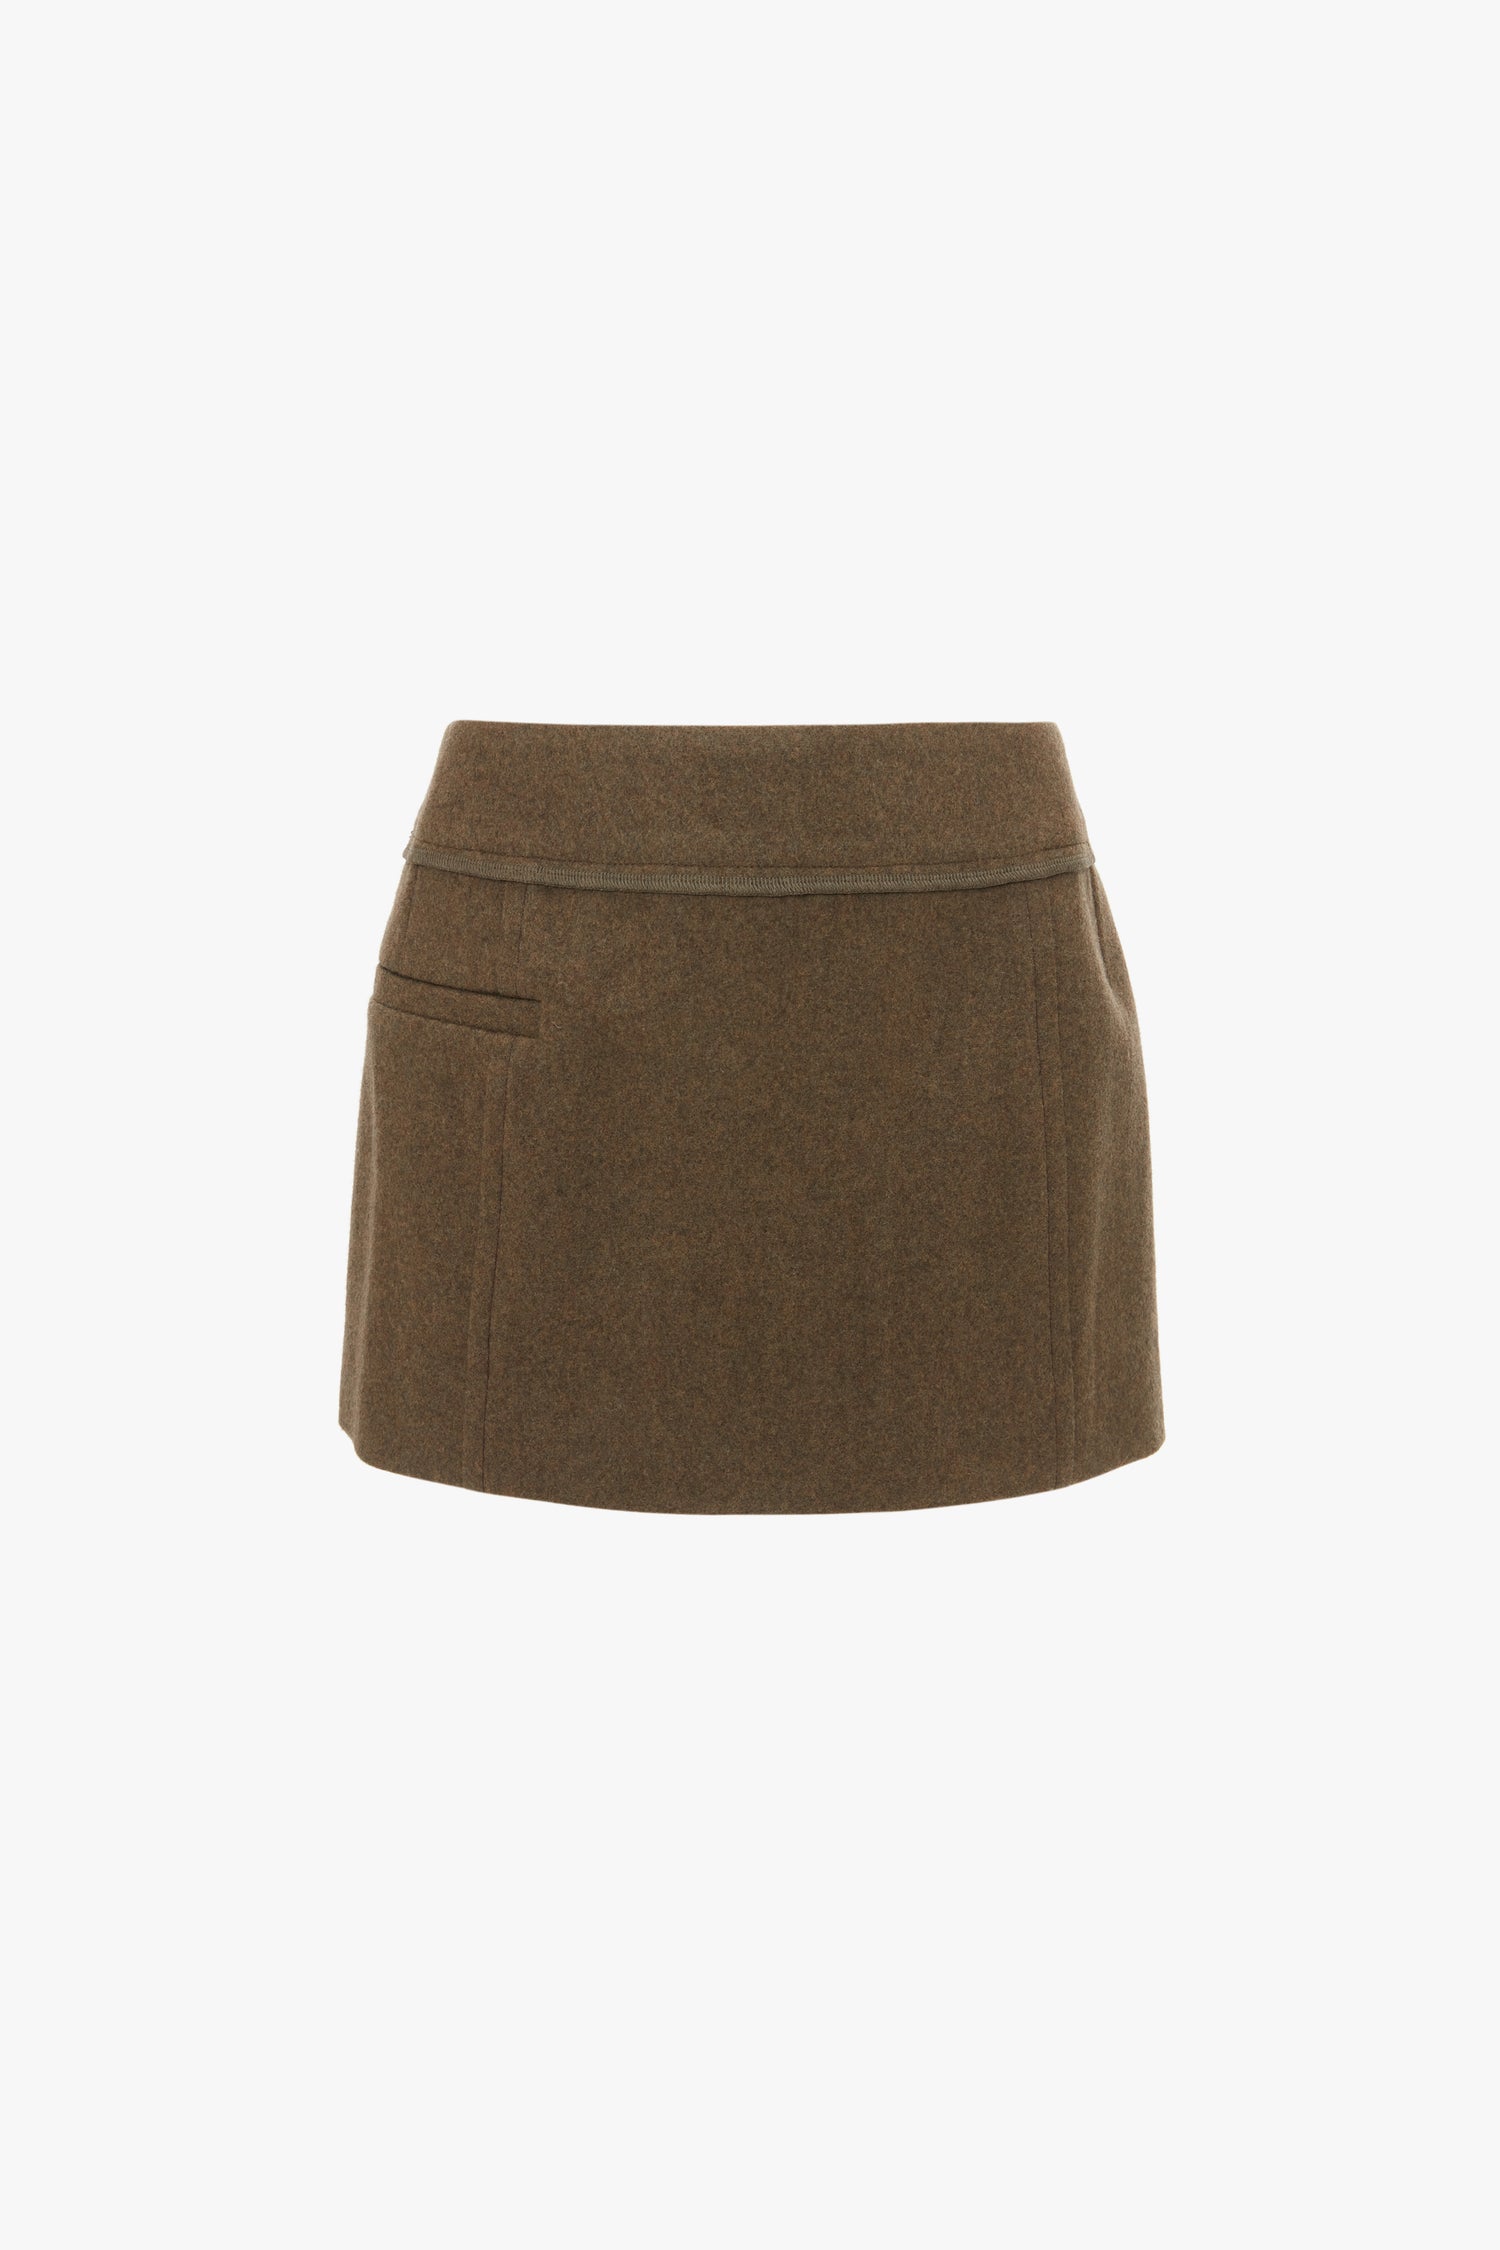 Tailored Mini Skirt In Khaki by Victoria Beckham in brown merino wool featuring a single front pocket and structured waistband.